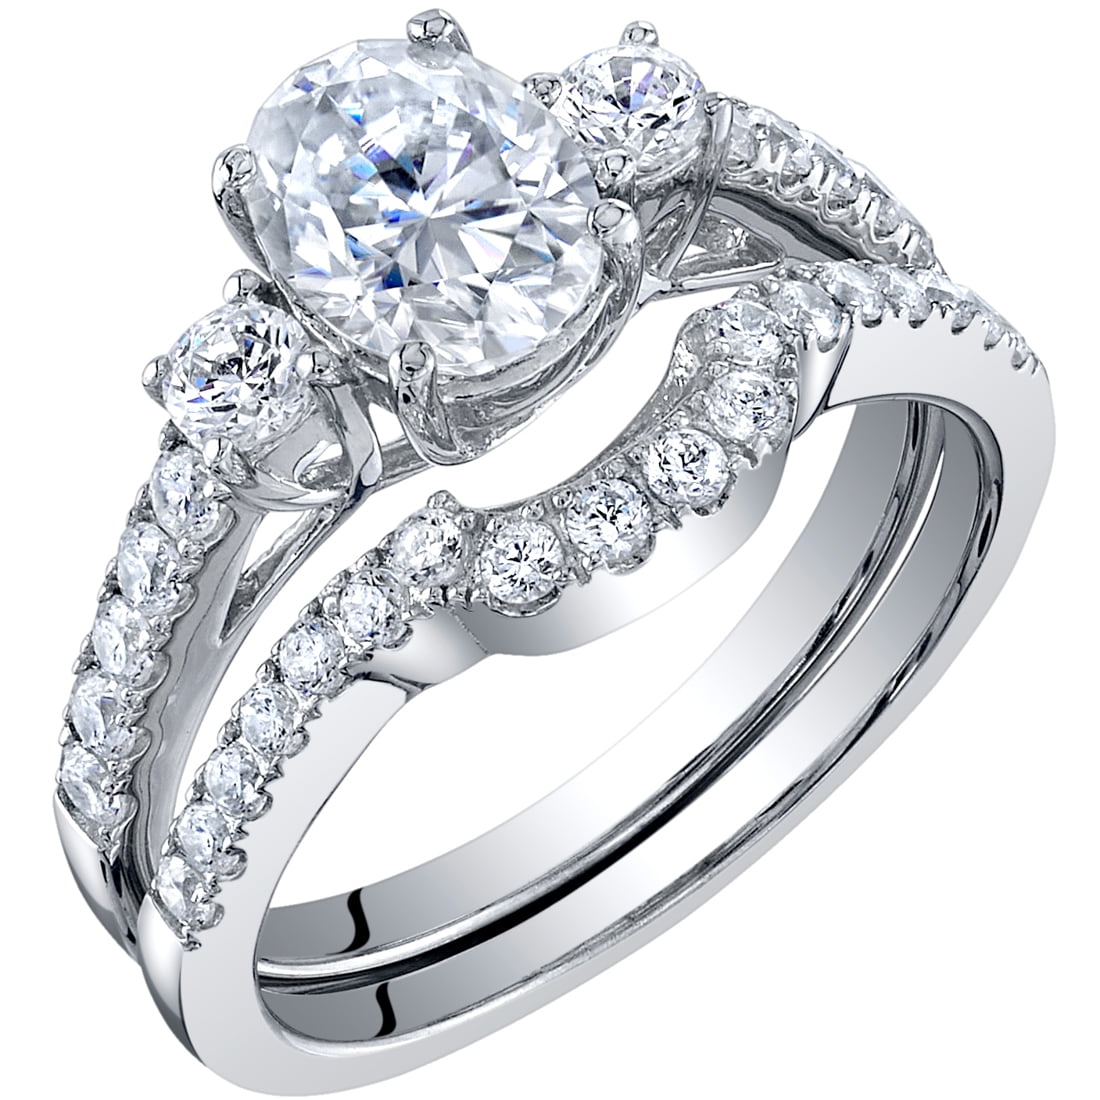 1.66 CT Super Quality Oval Moissanite Halo Diamond Engagement Ring in 92.5 Sterling Silver